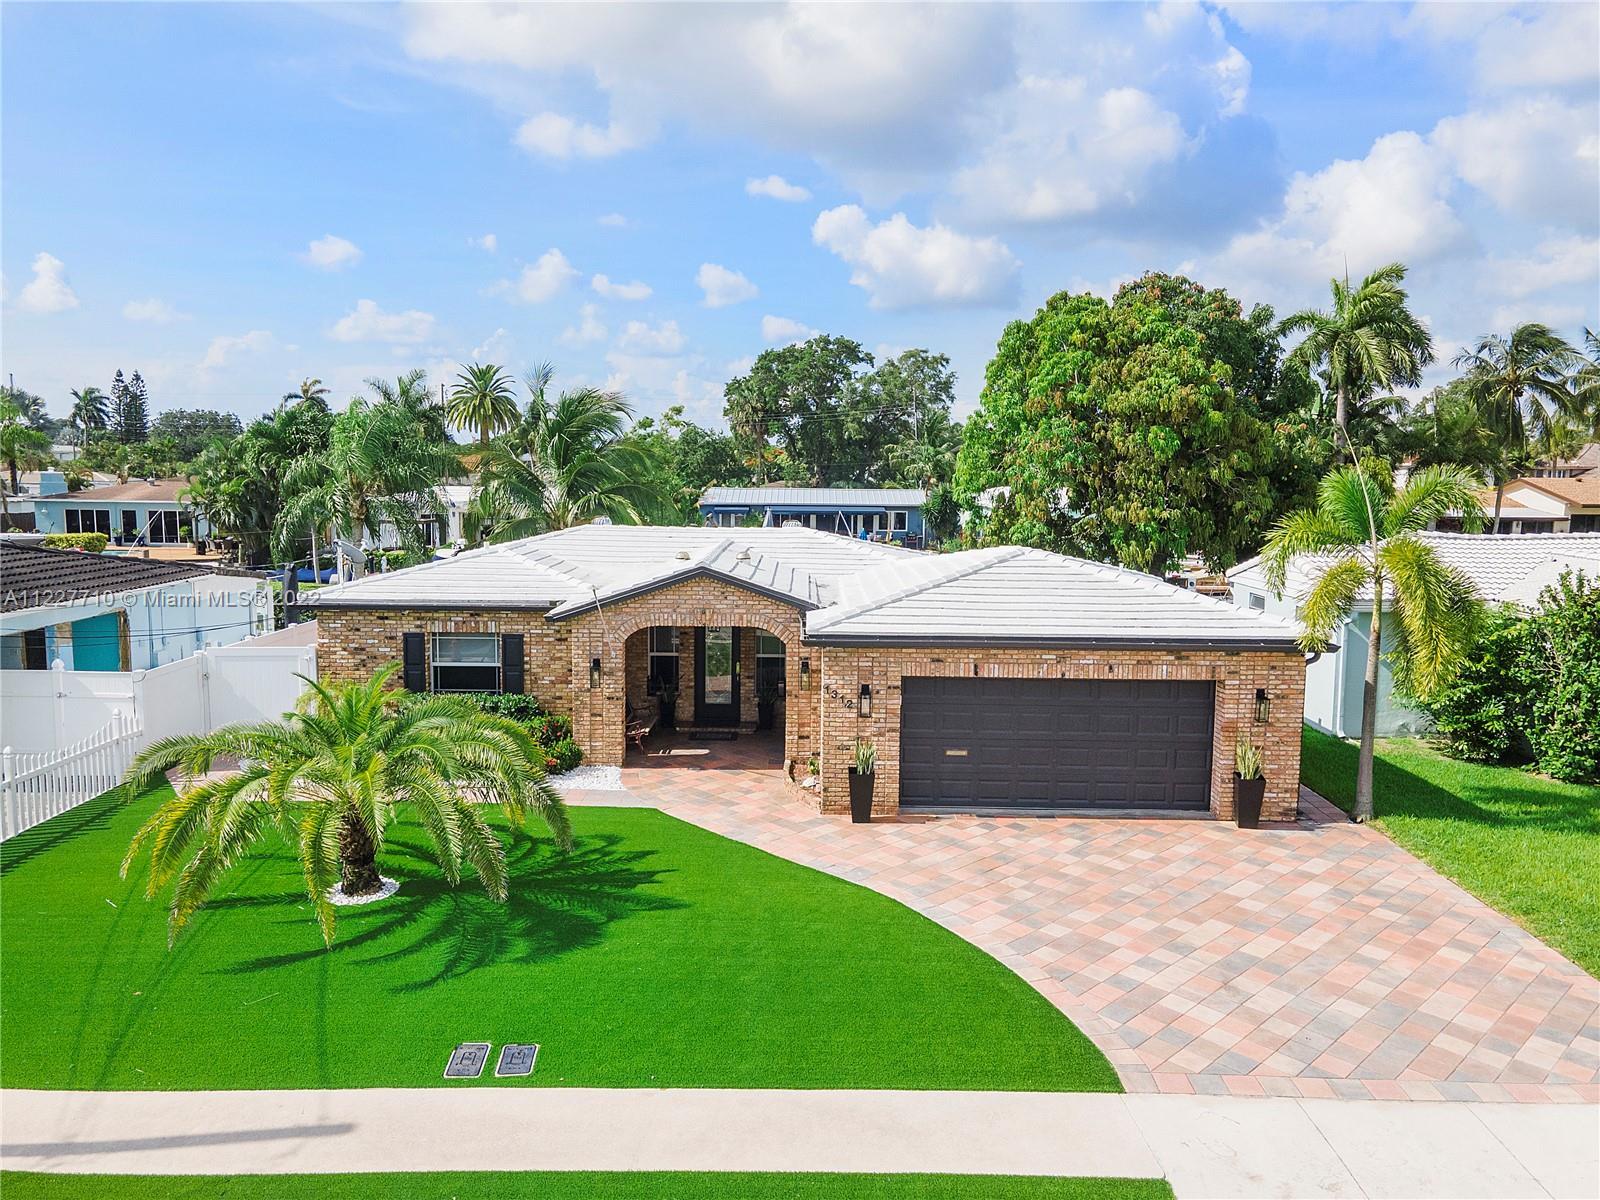 A perfect tropical paradise in the heart of Florida. This home has everything you need; it's fully r